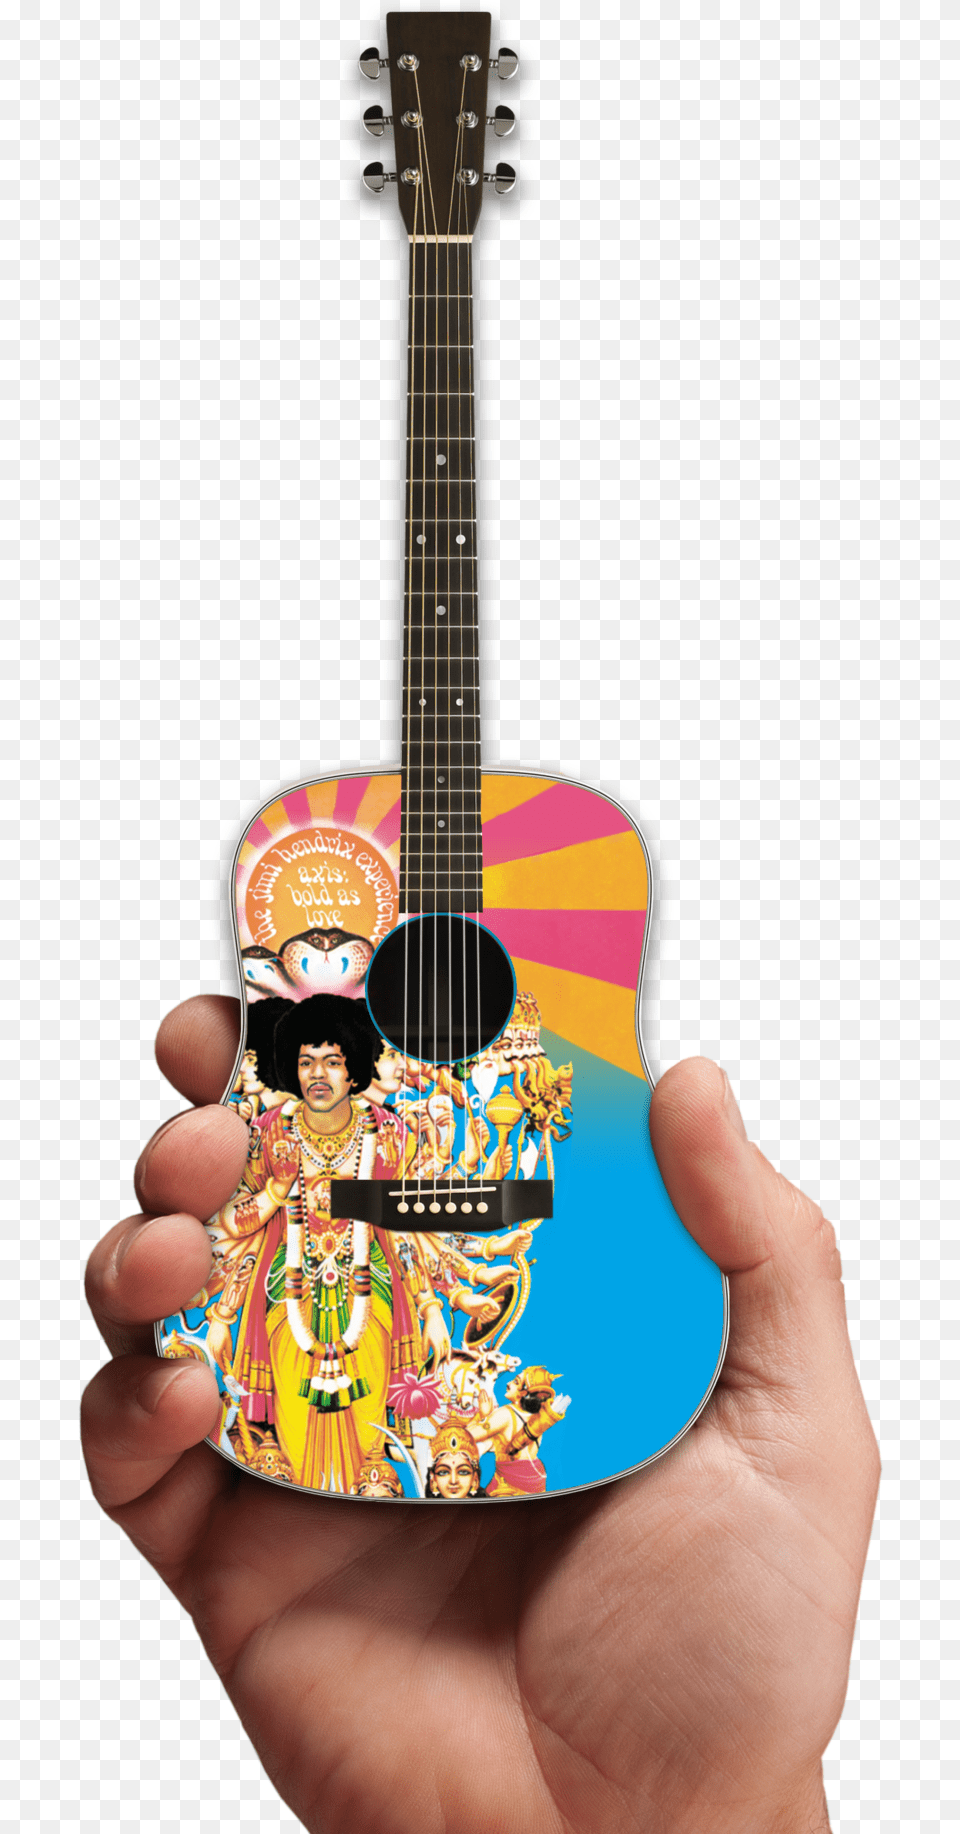 Axe Heaven Jimi Hendrix Axis Bold As Love Mini Acoustic Axe Heaven Jimi Hendrix Axis Bold As Love Acoustic, Musical Instrument, Guitar, Adult, Wedding Png